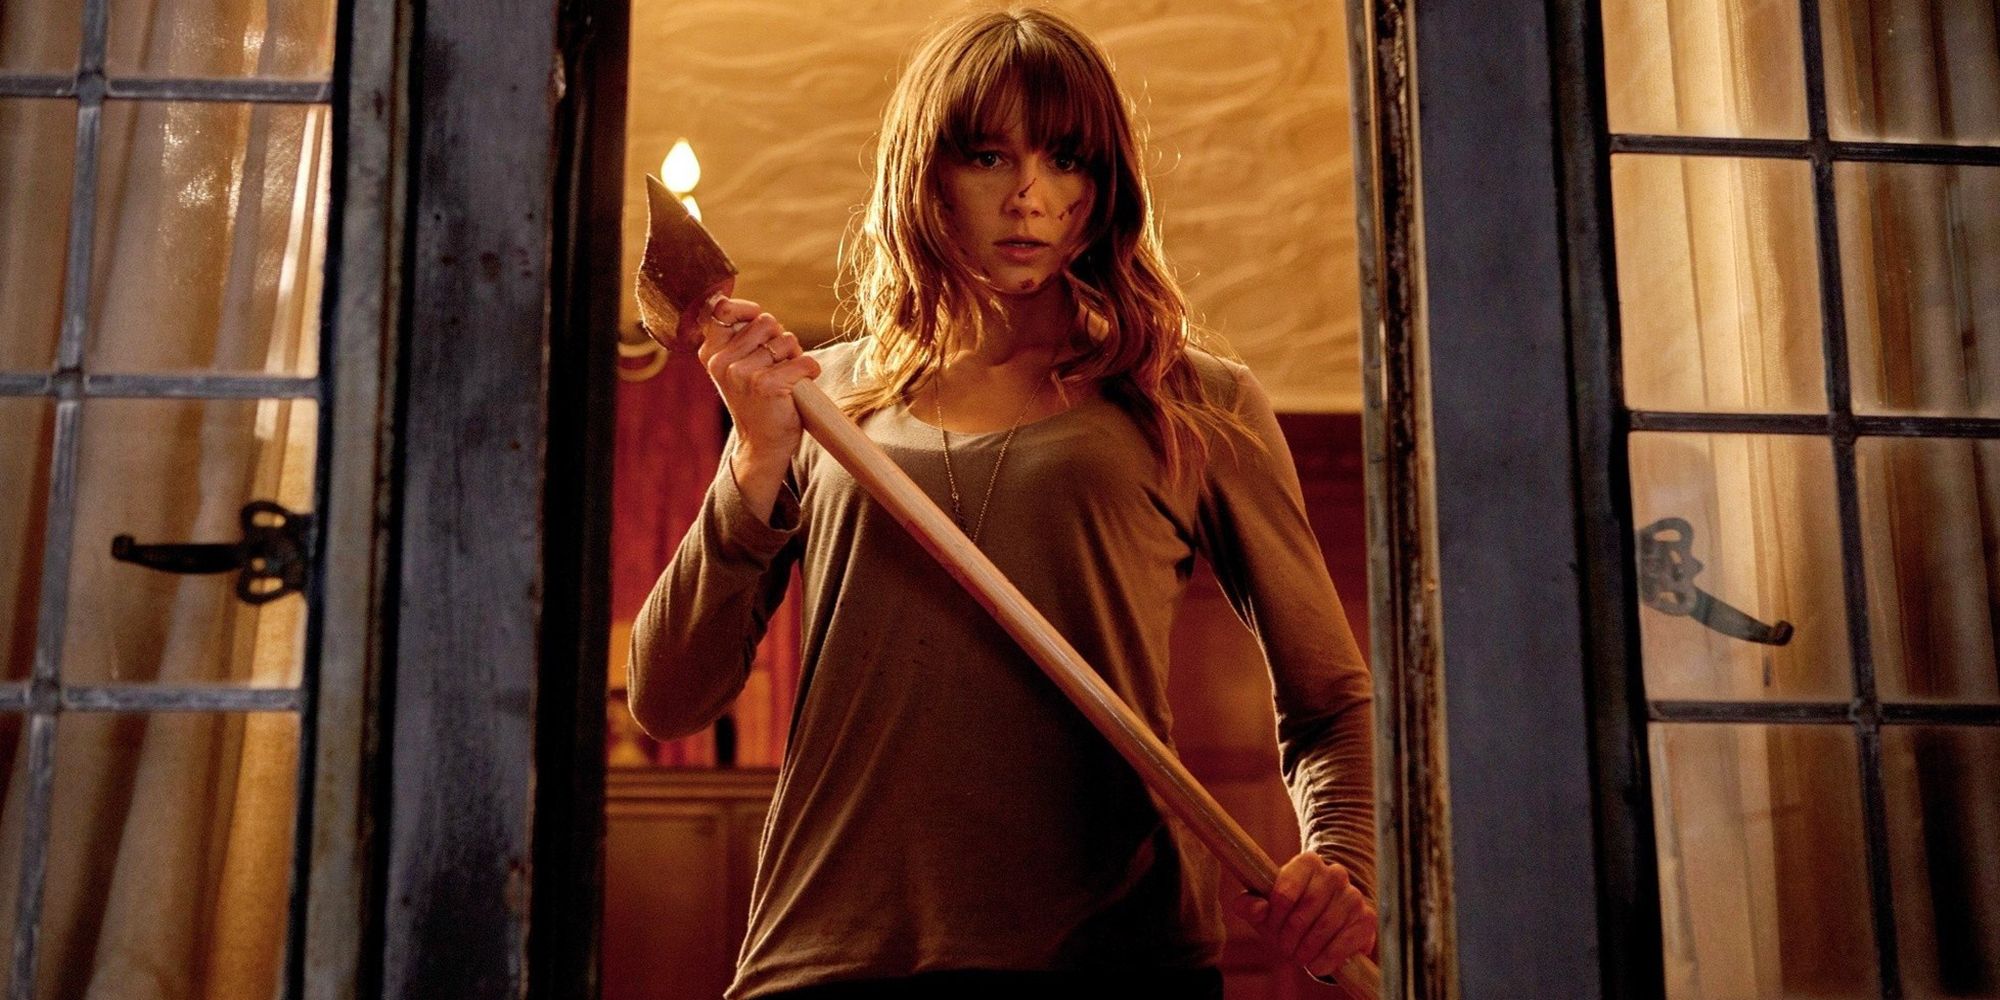 Erin in You're Next